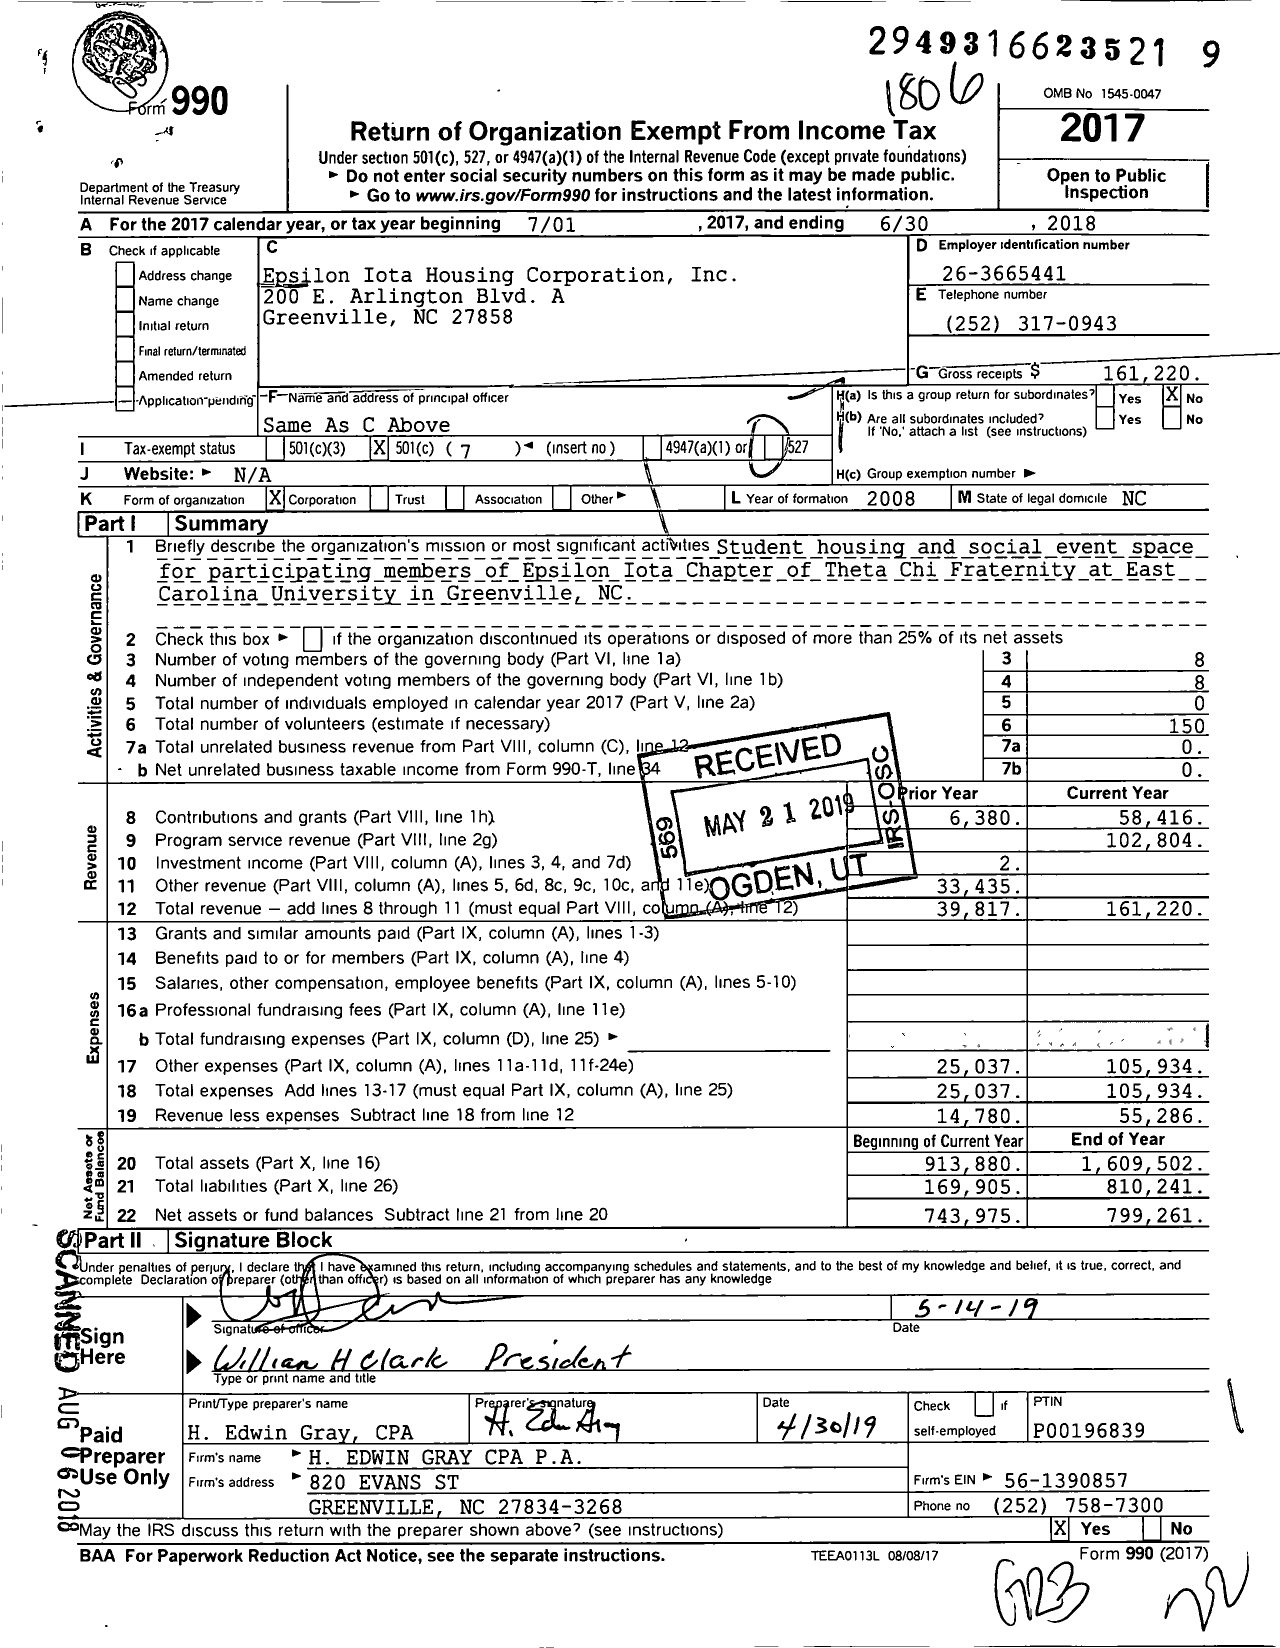 Image of first page of 2017 Form 990O for Epsilon Iota Housing Corporation